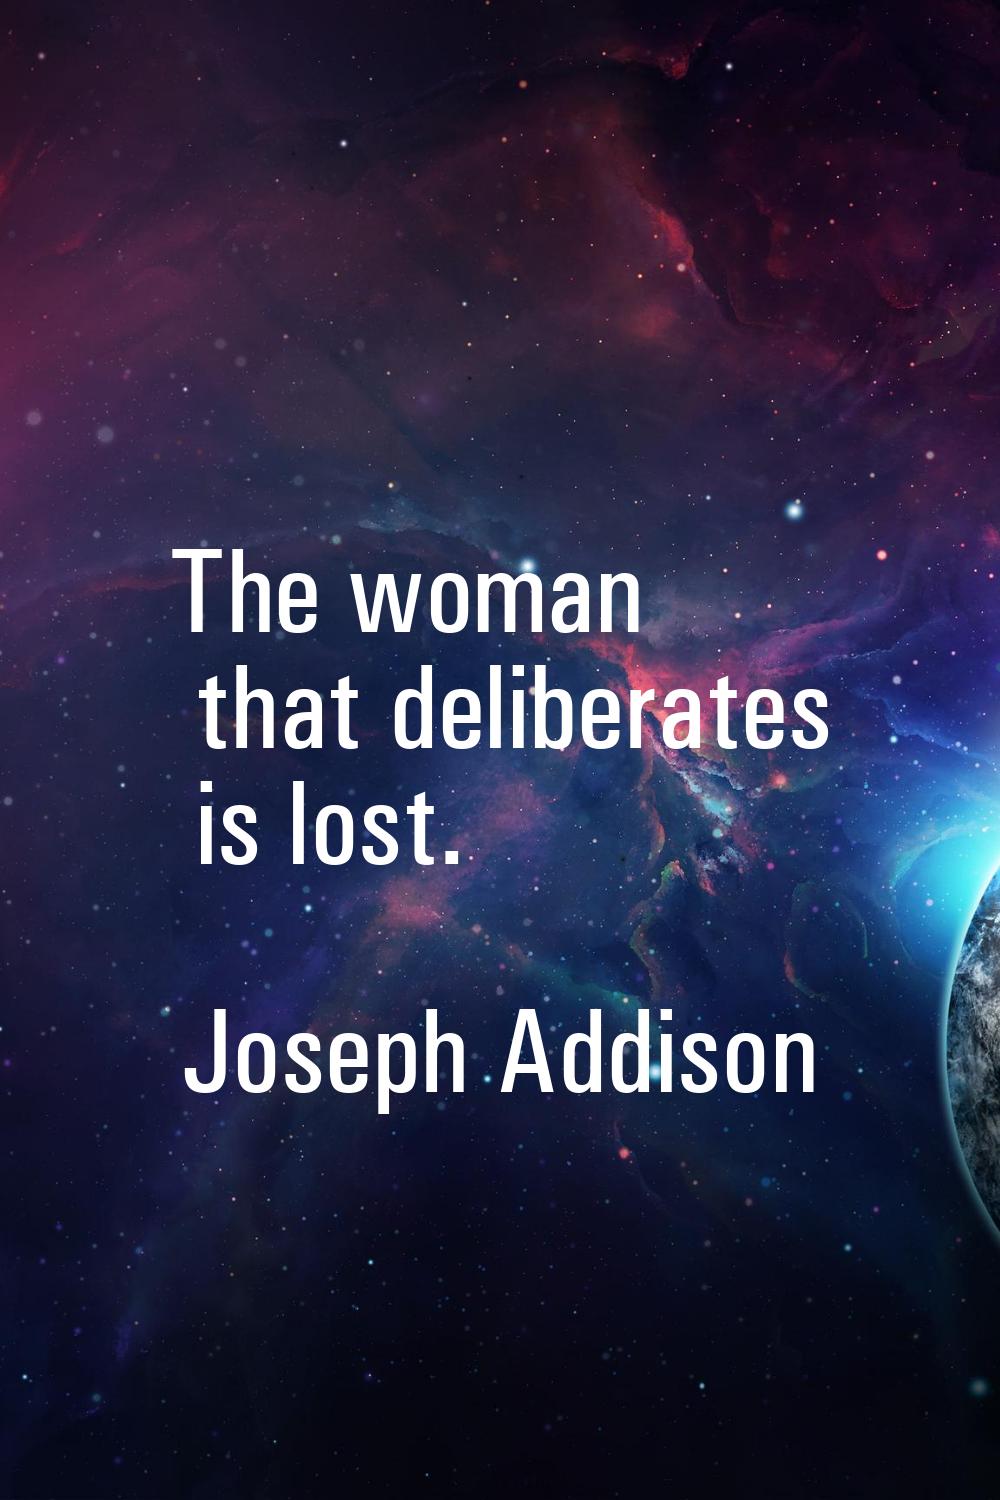 The woman that deliberates is lost.